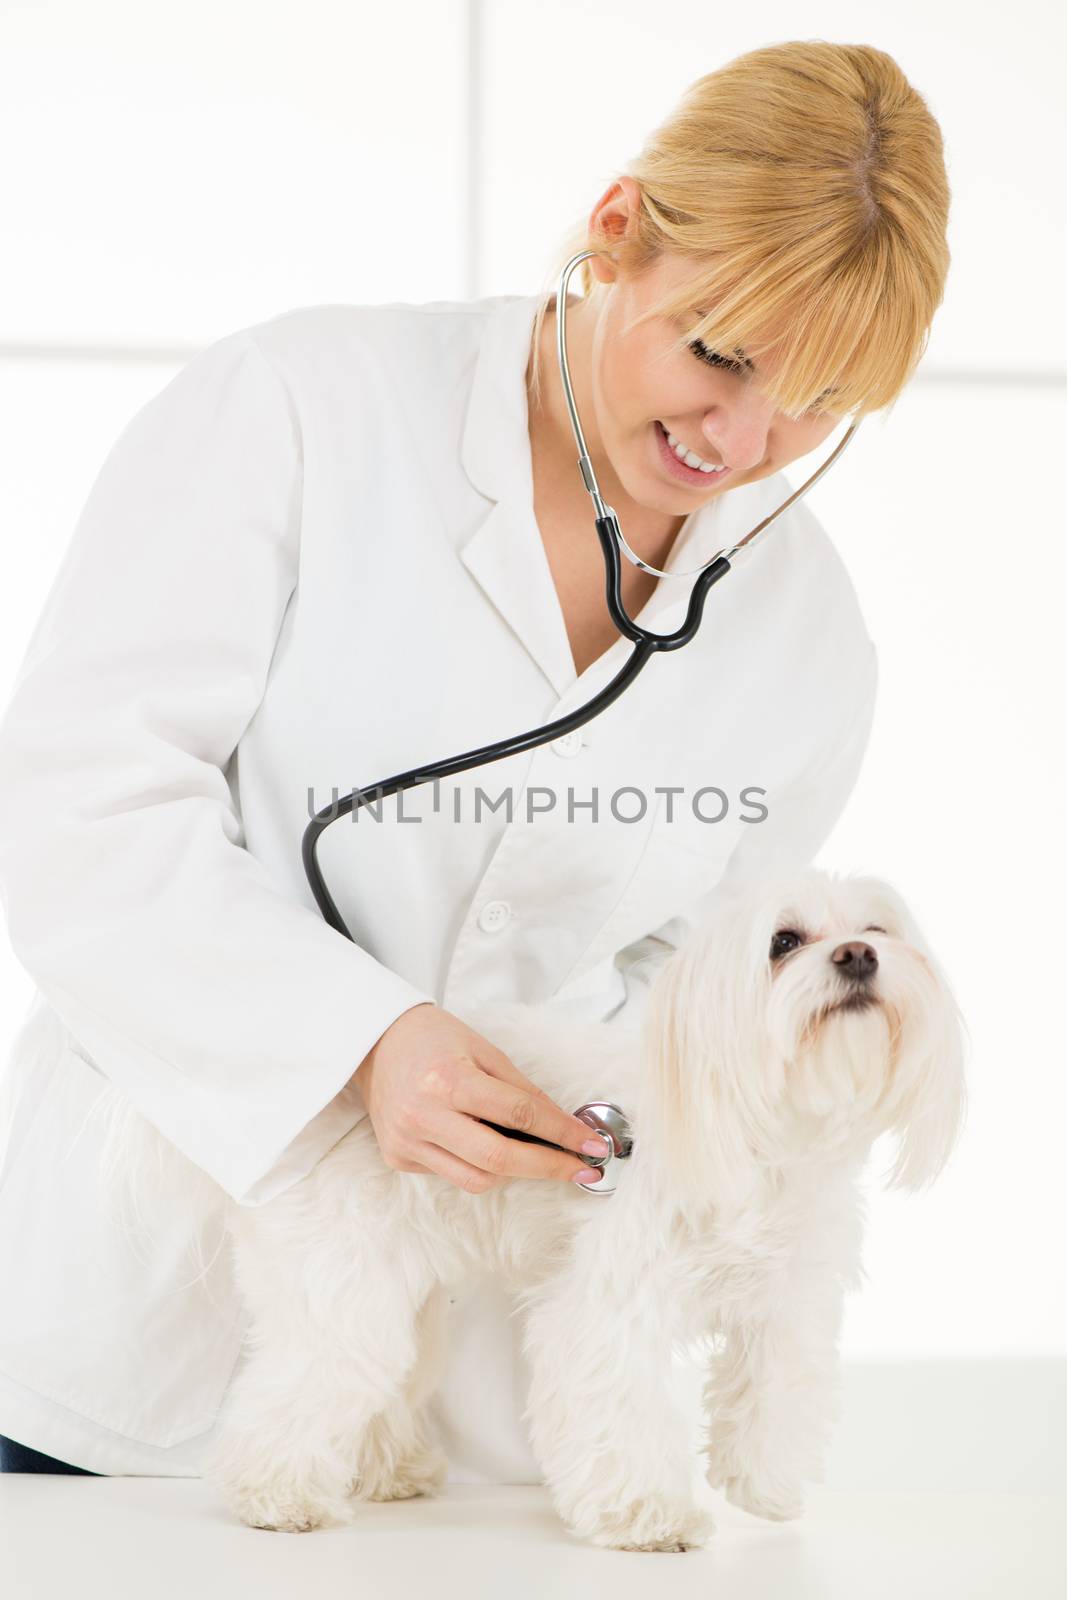 At The Veterinary by MilanMarkovic78